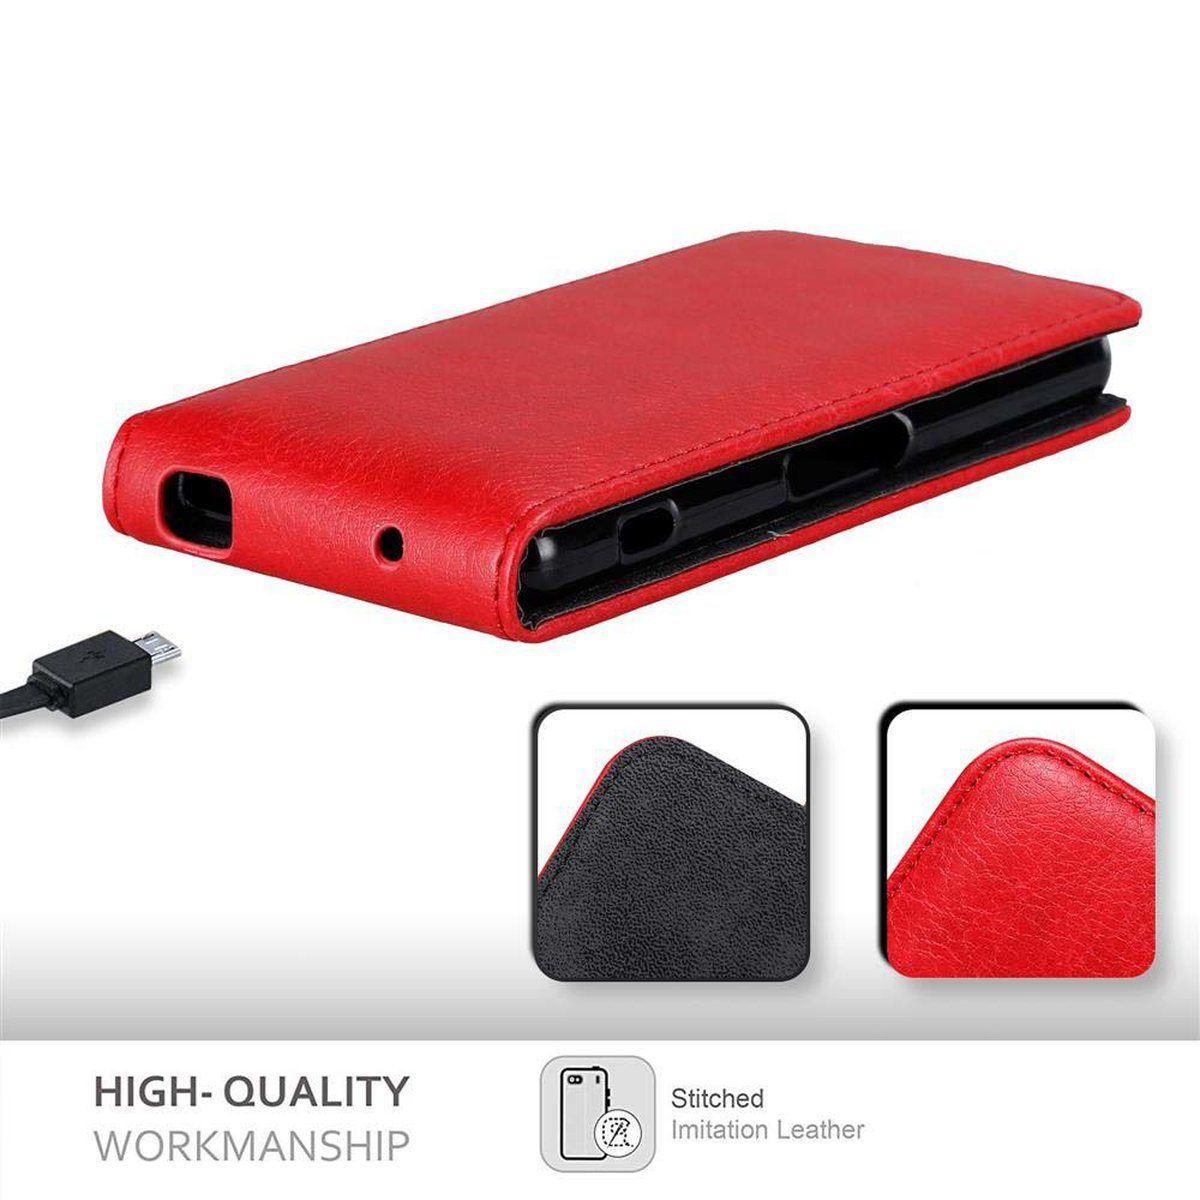 Xperia Flip Style, Z3 CADORABO Sony, COMPACT, ROT APFEL im Flip Cover, Hülle